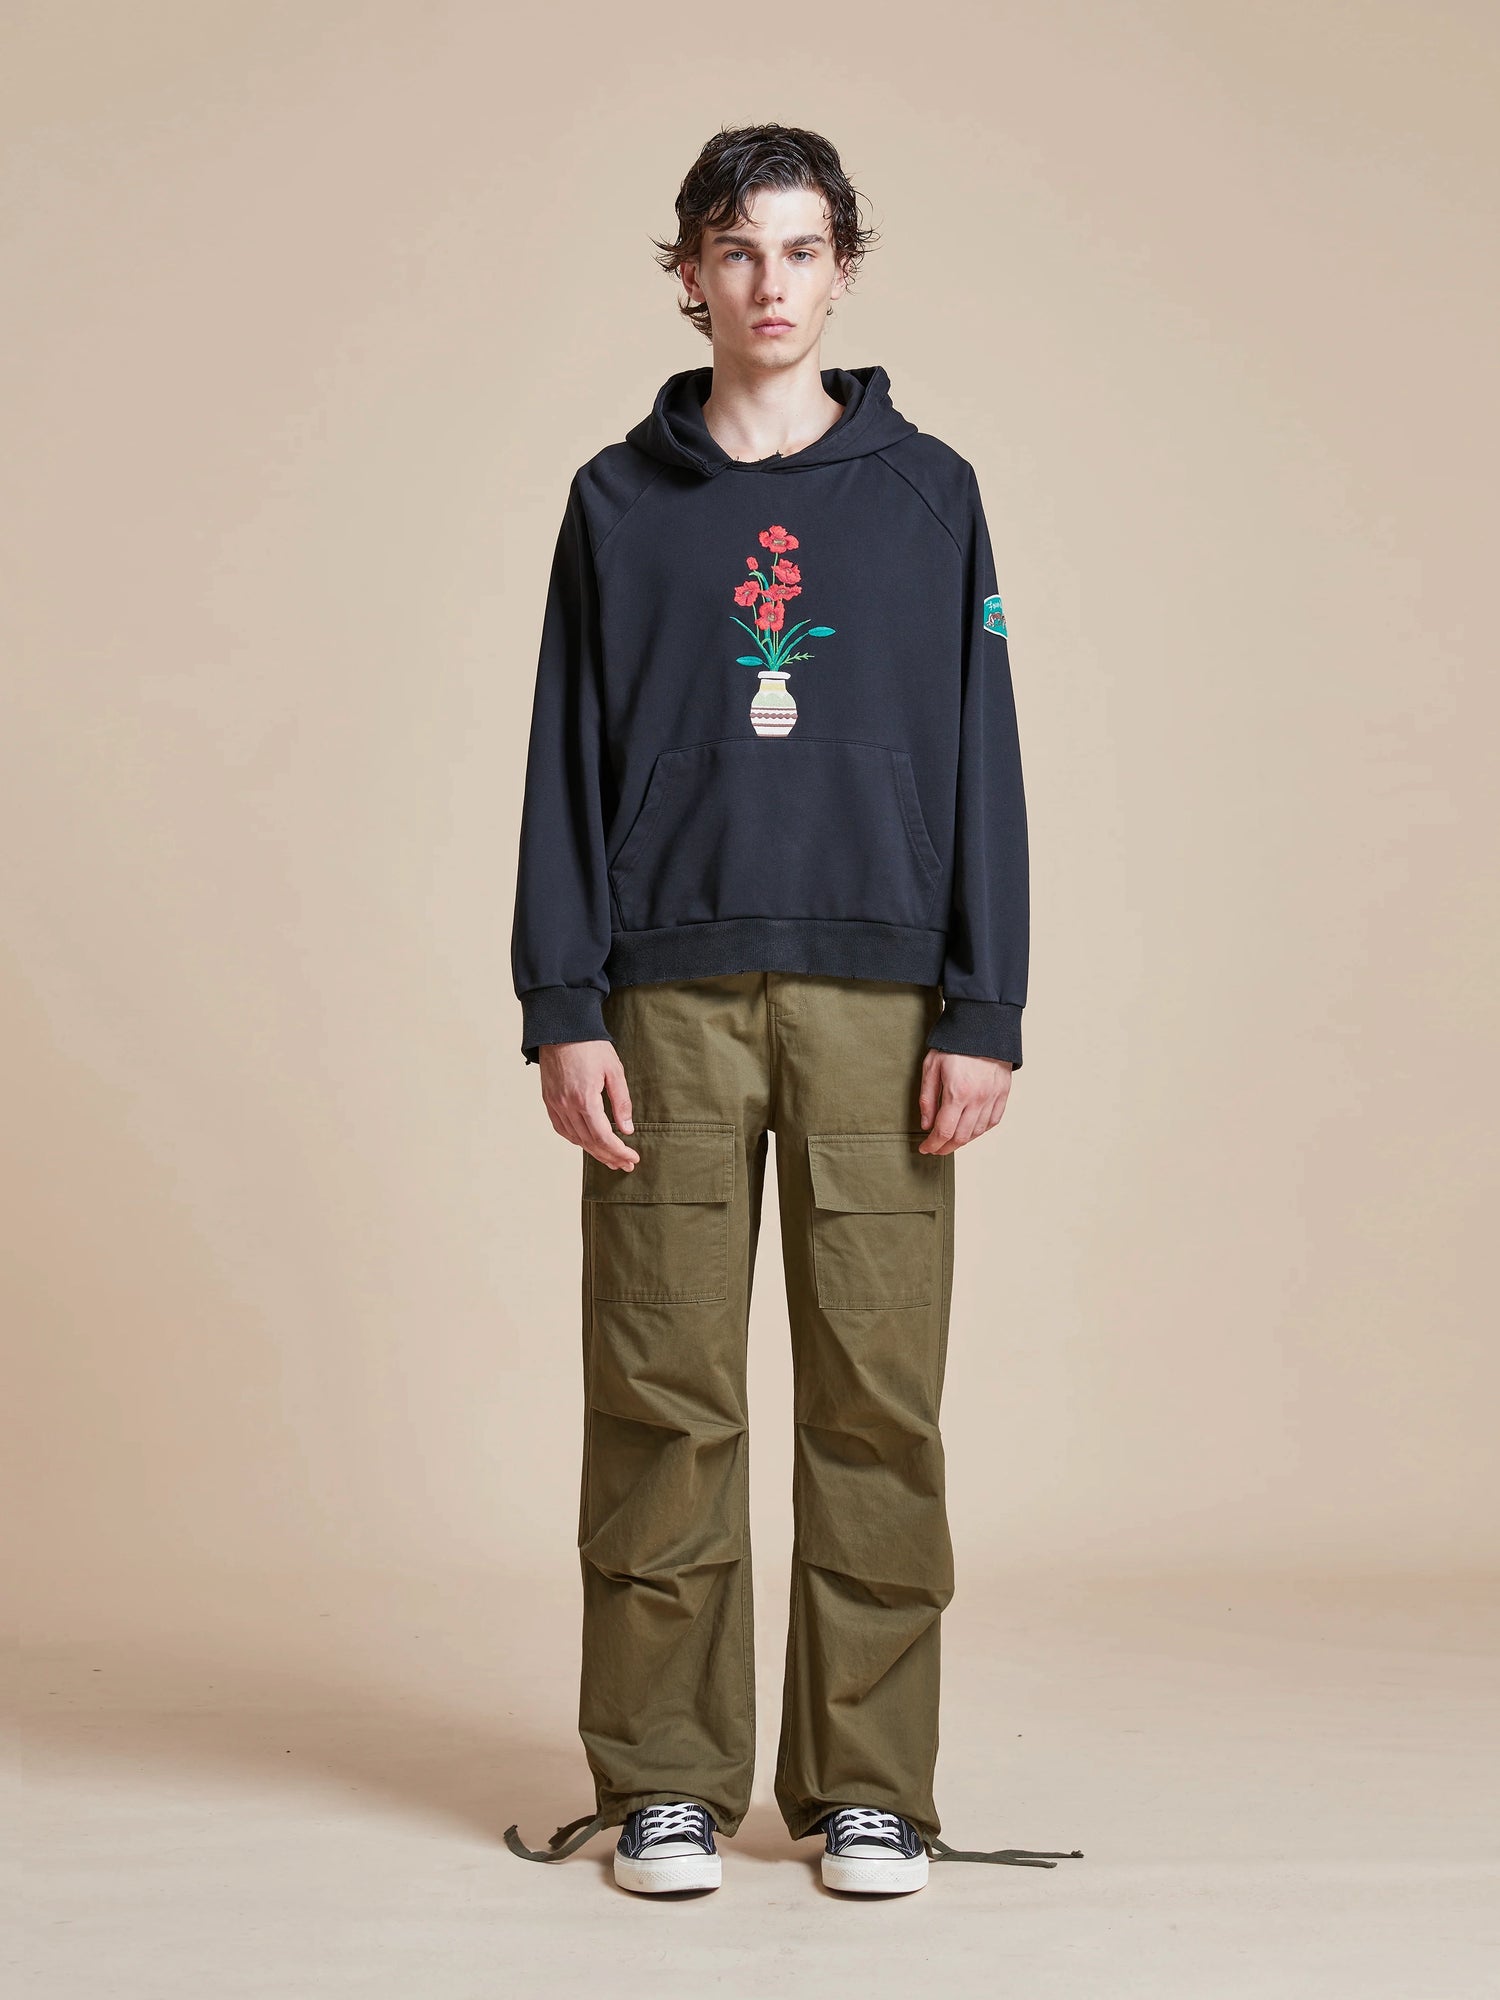 A man wearing a Flowers Vase Hoodie by Found with a vintage feel and green pants.